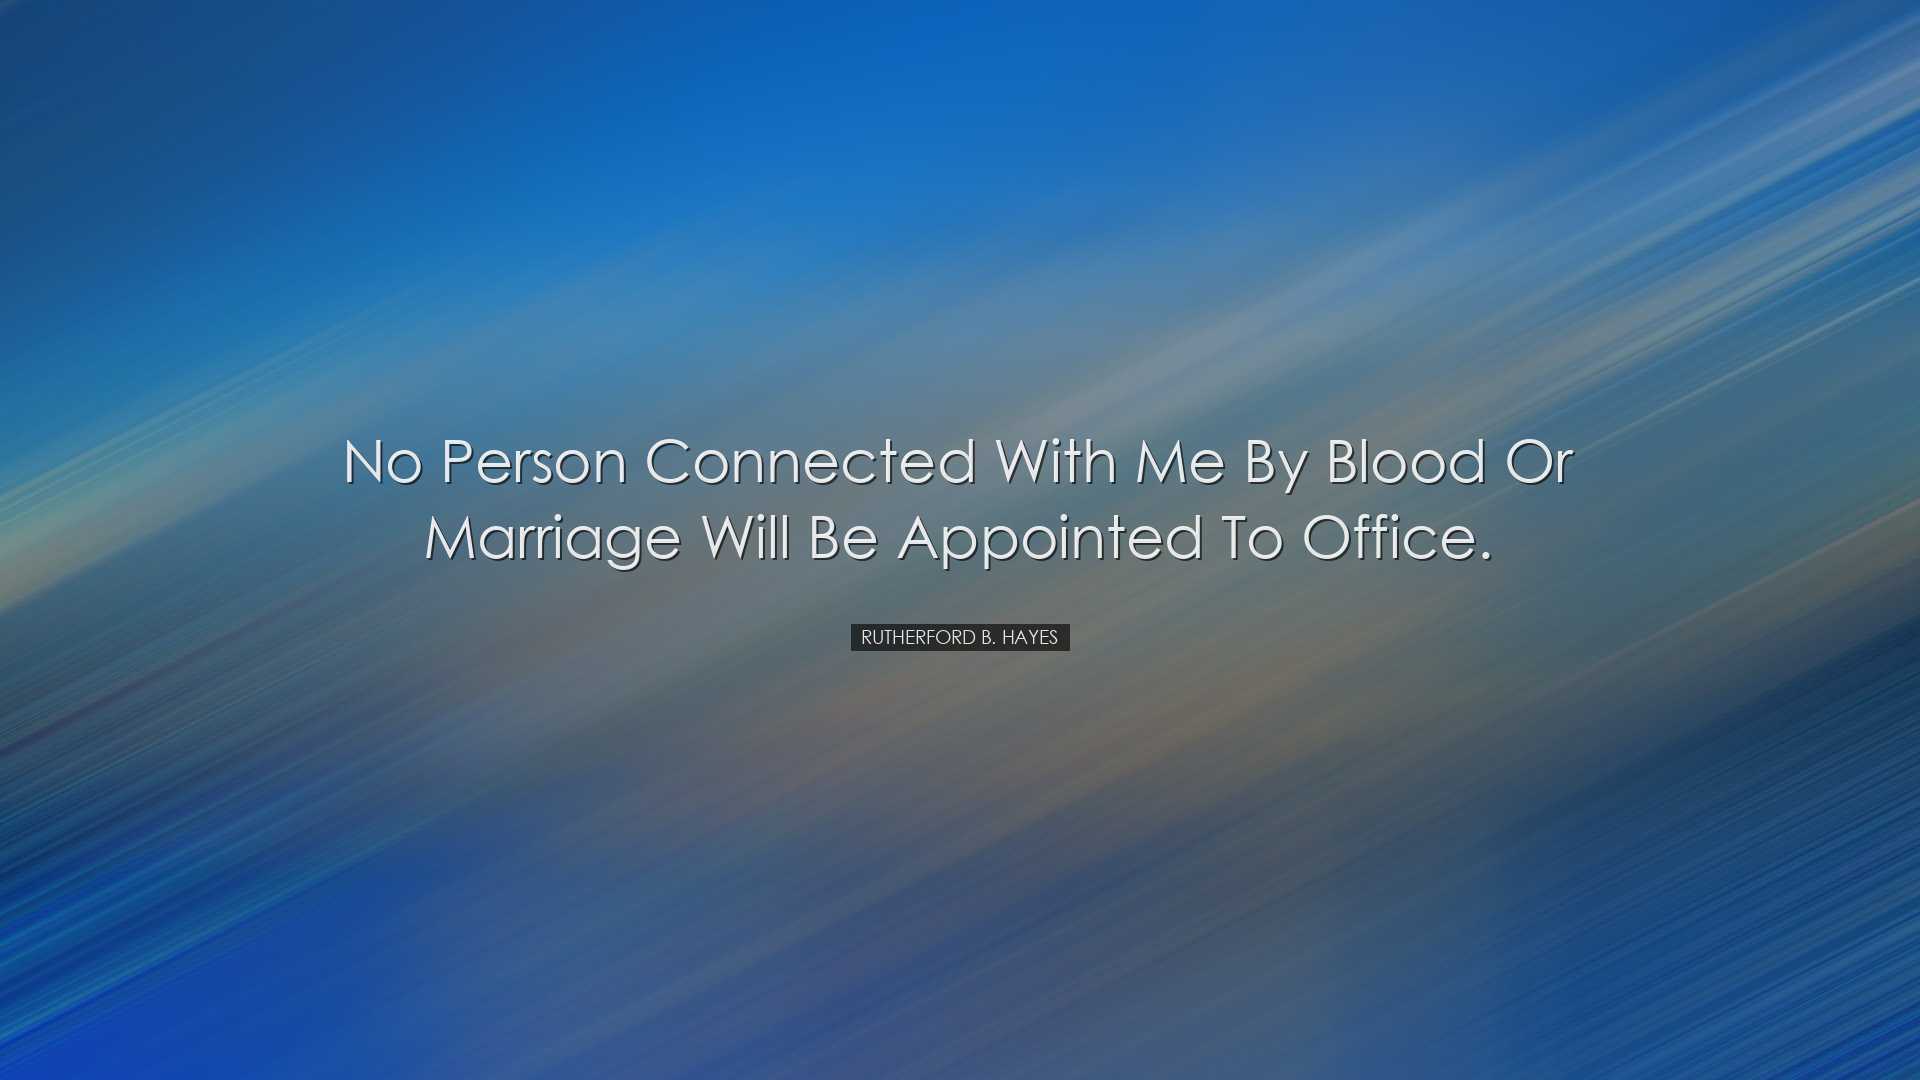 No person connected with me by blood or marriage will be appointed